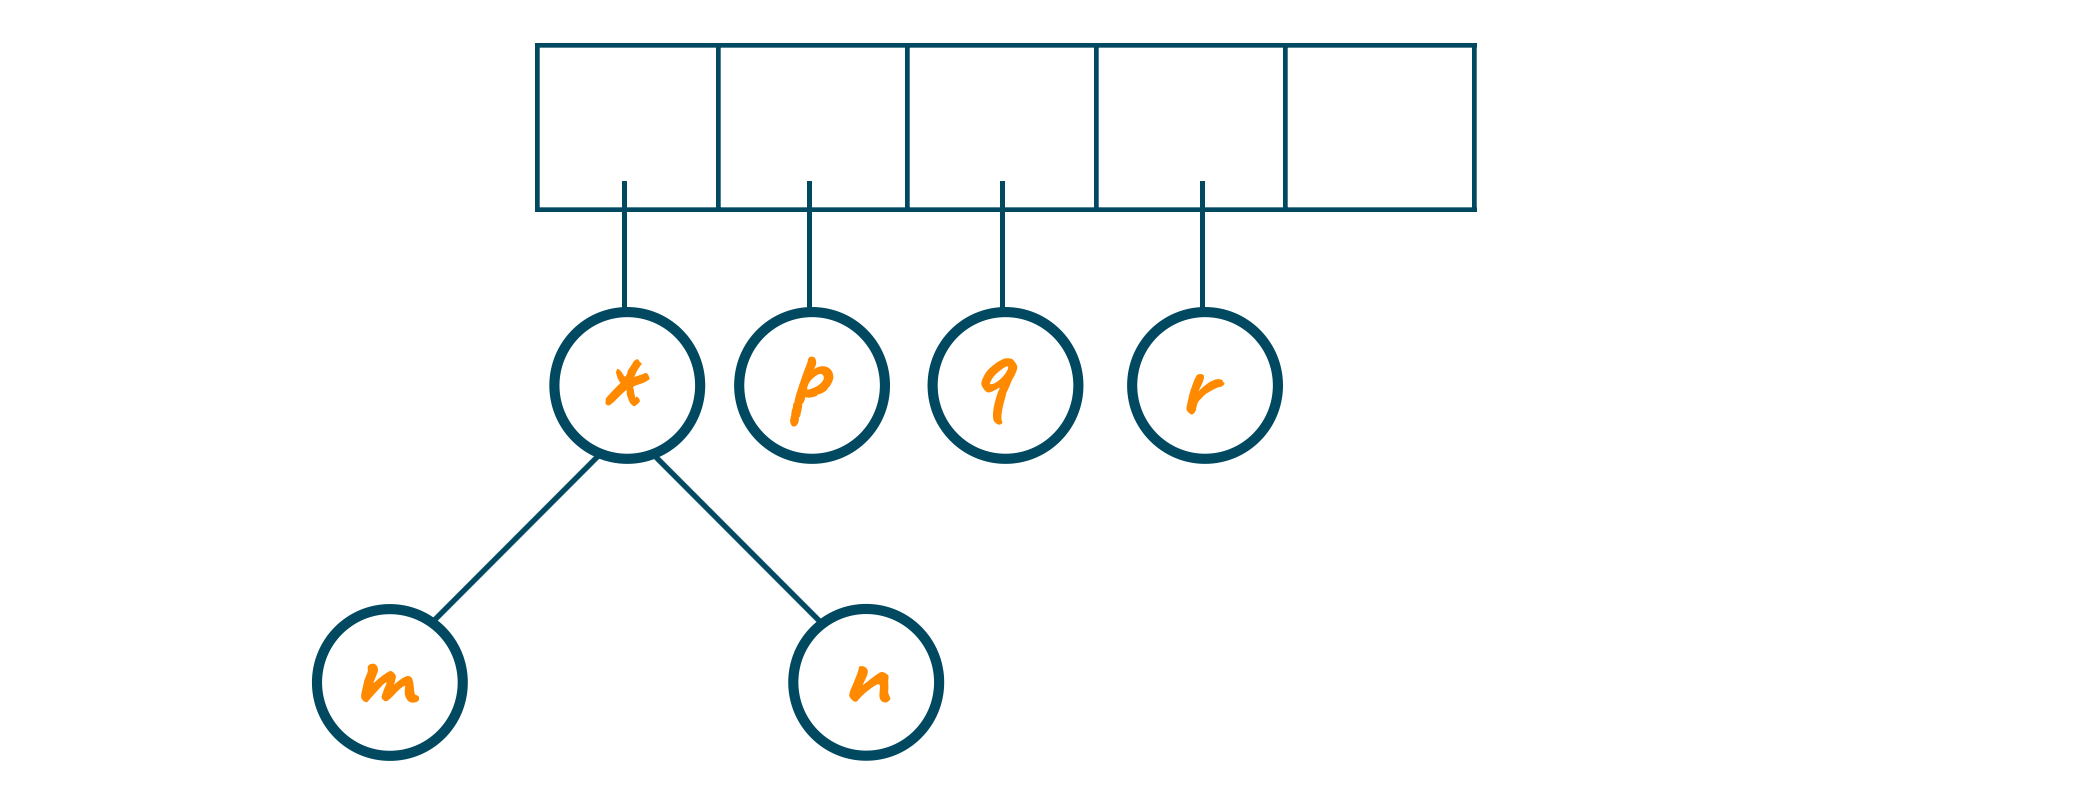 postfix expression traverse to “p”, “q”, and “r